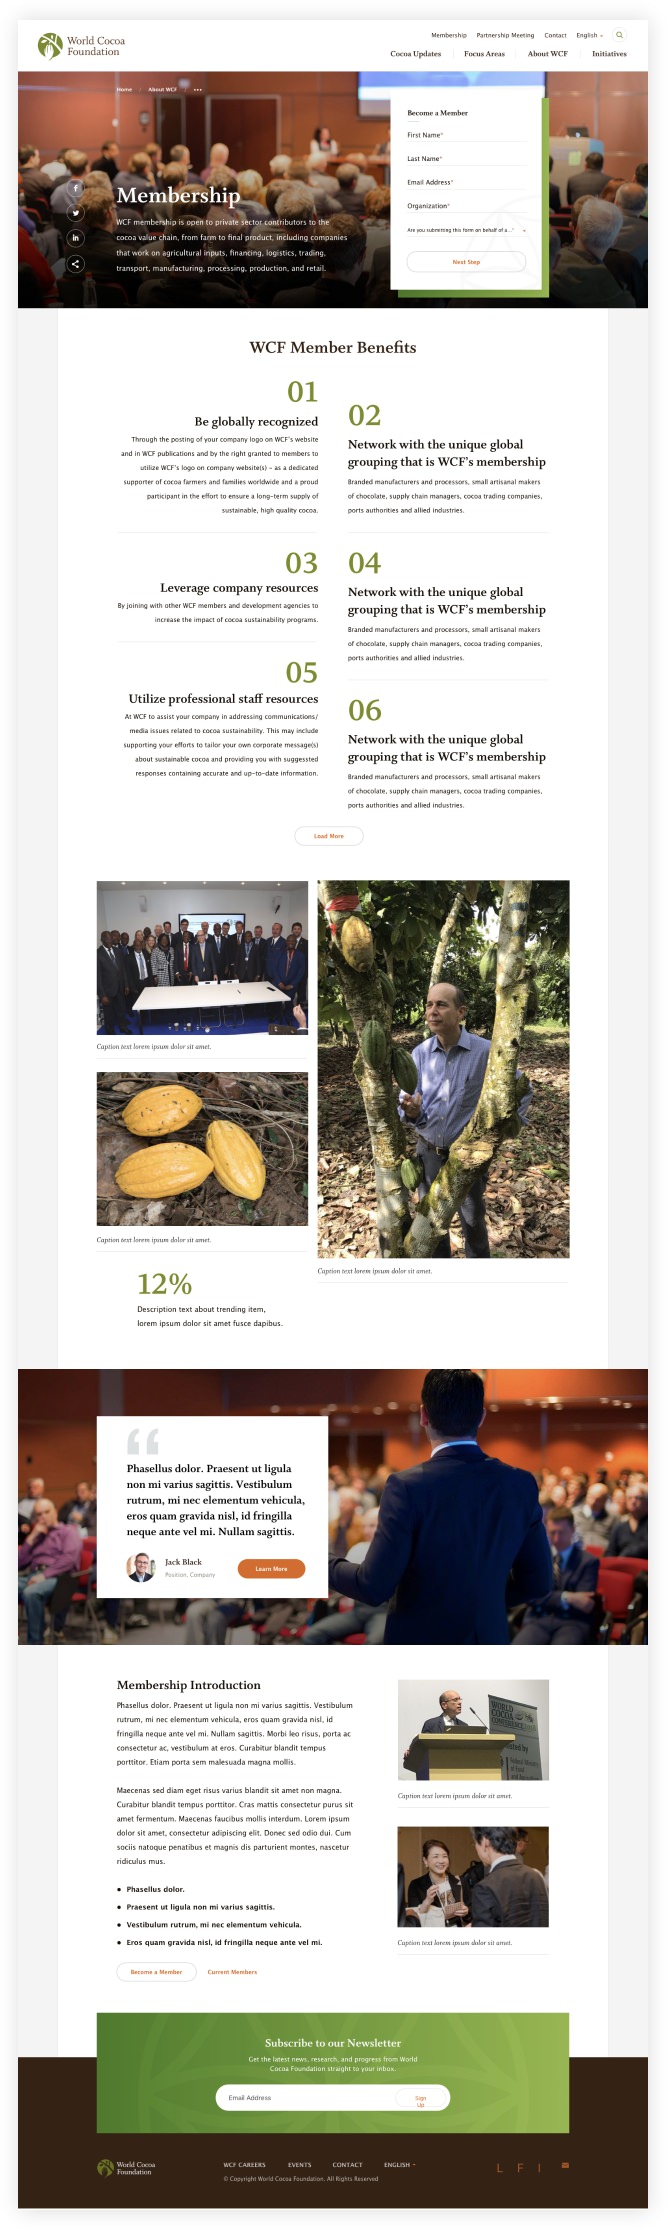 Membership page of World Cocoa Foundation